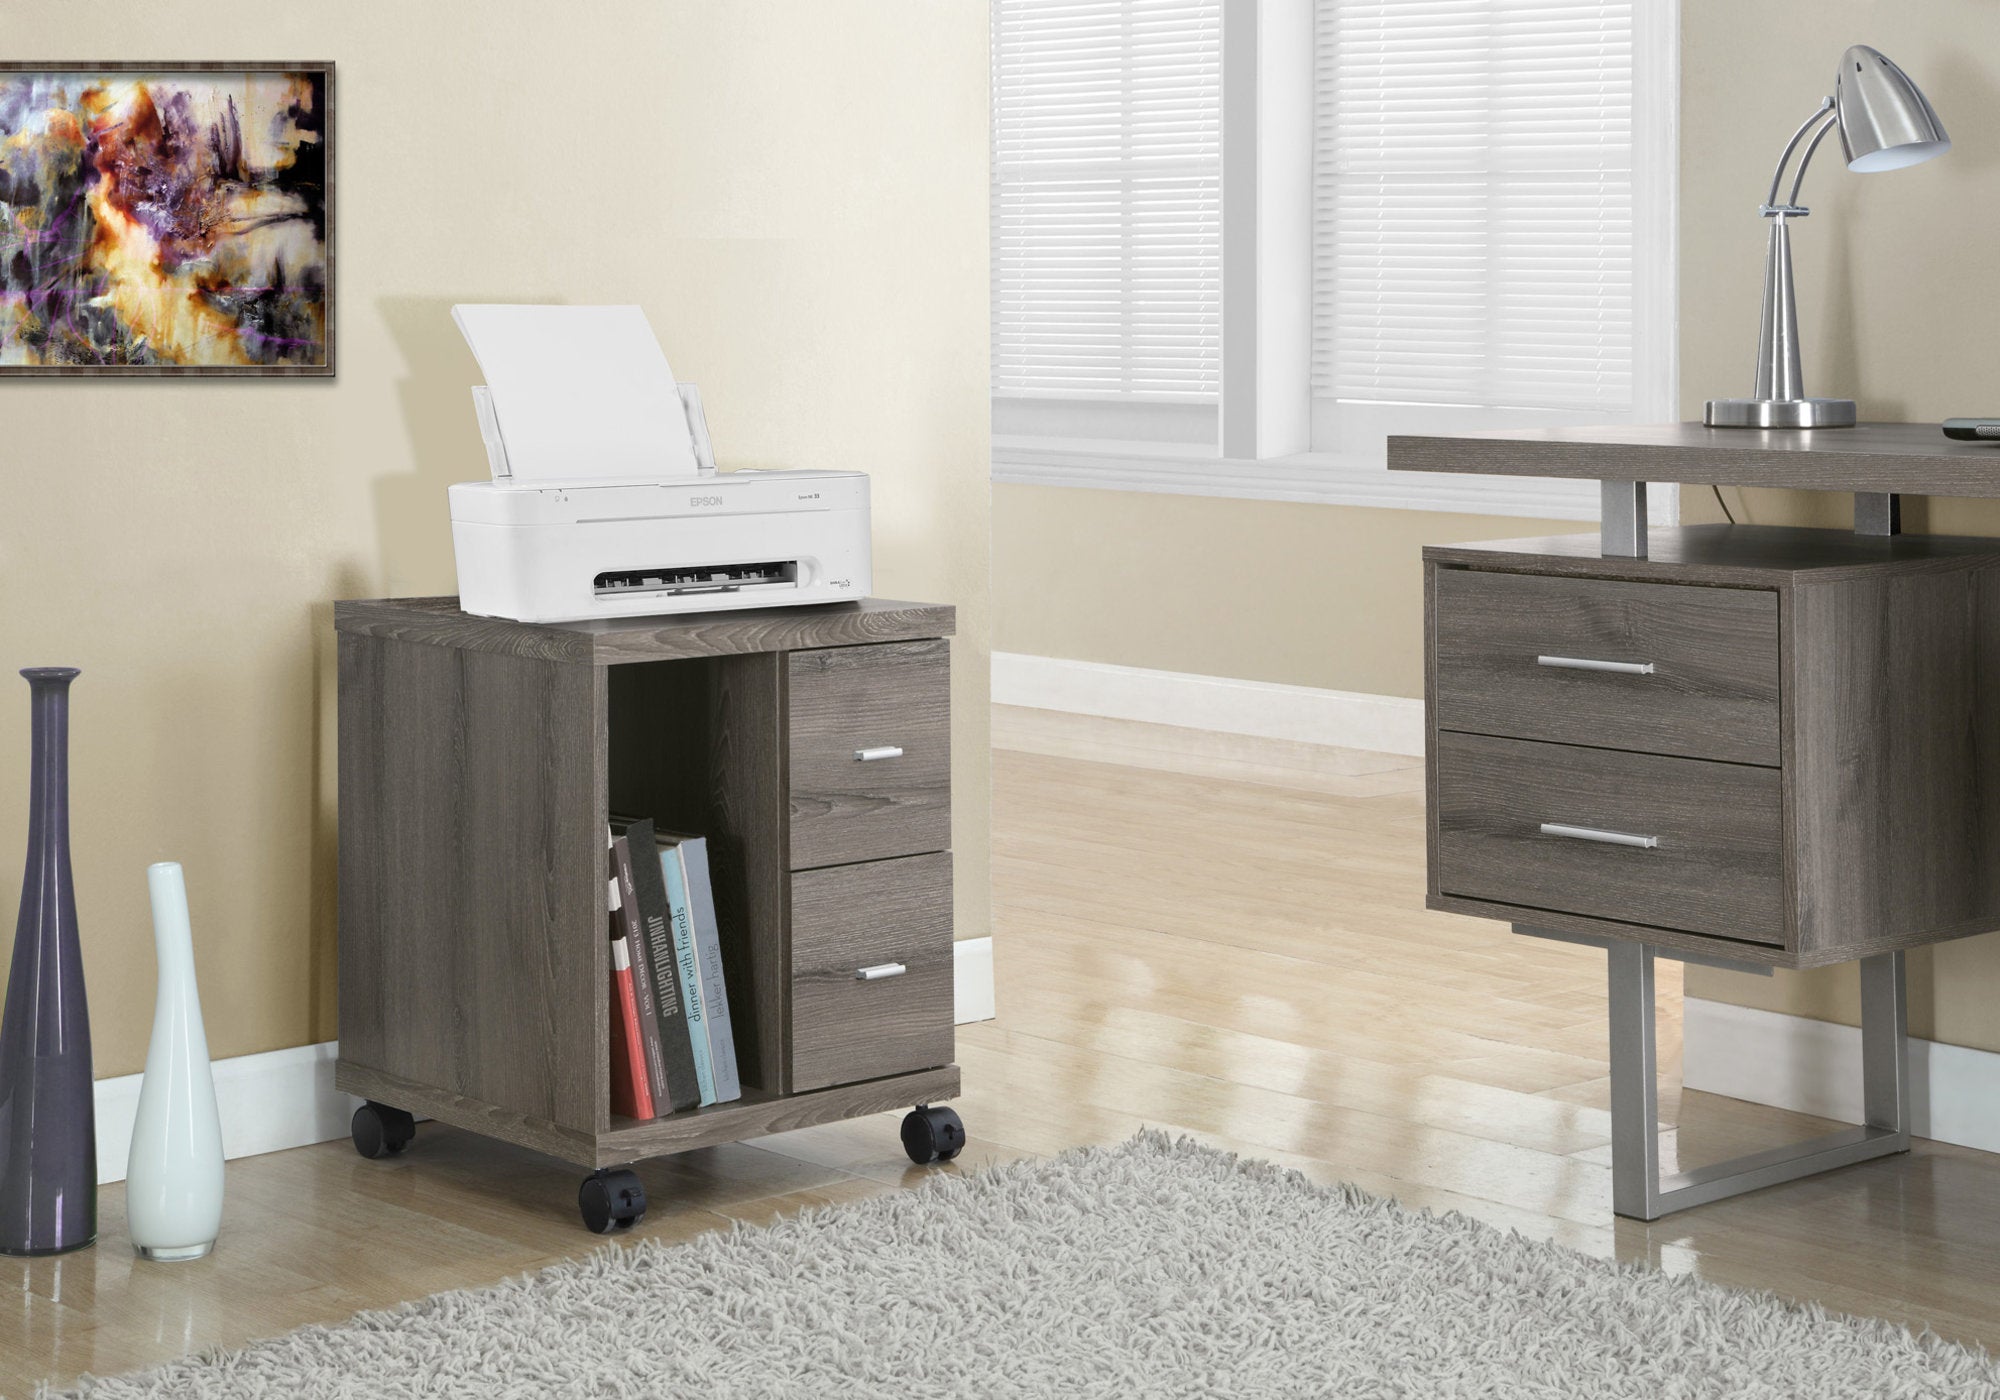 MN-867056    Office, File Cabinet, Printer Cart, Rolling File Cabinet, Mobile, Storage, Laminate, Dark Taupe, Contemporary, Modern